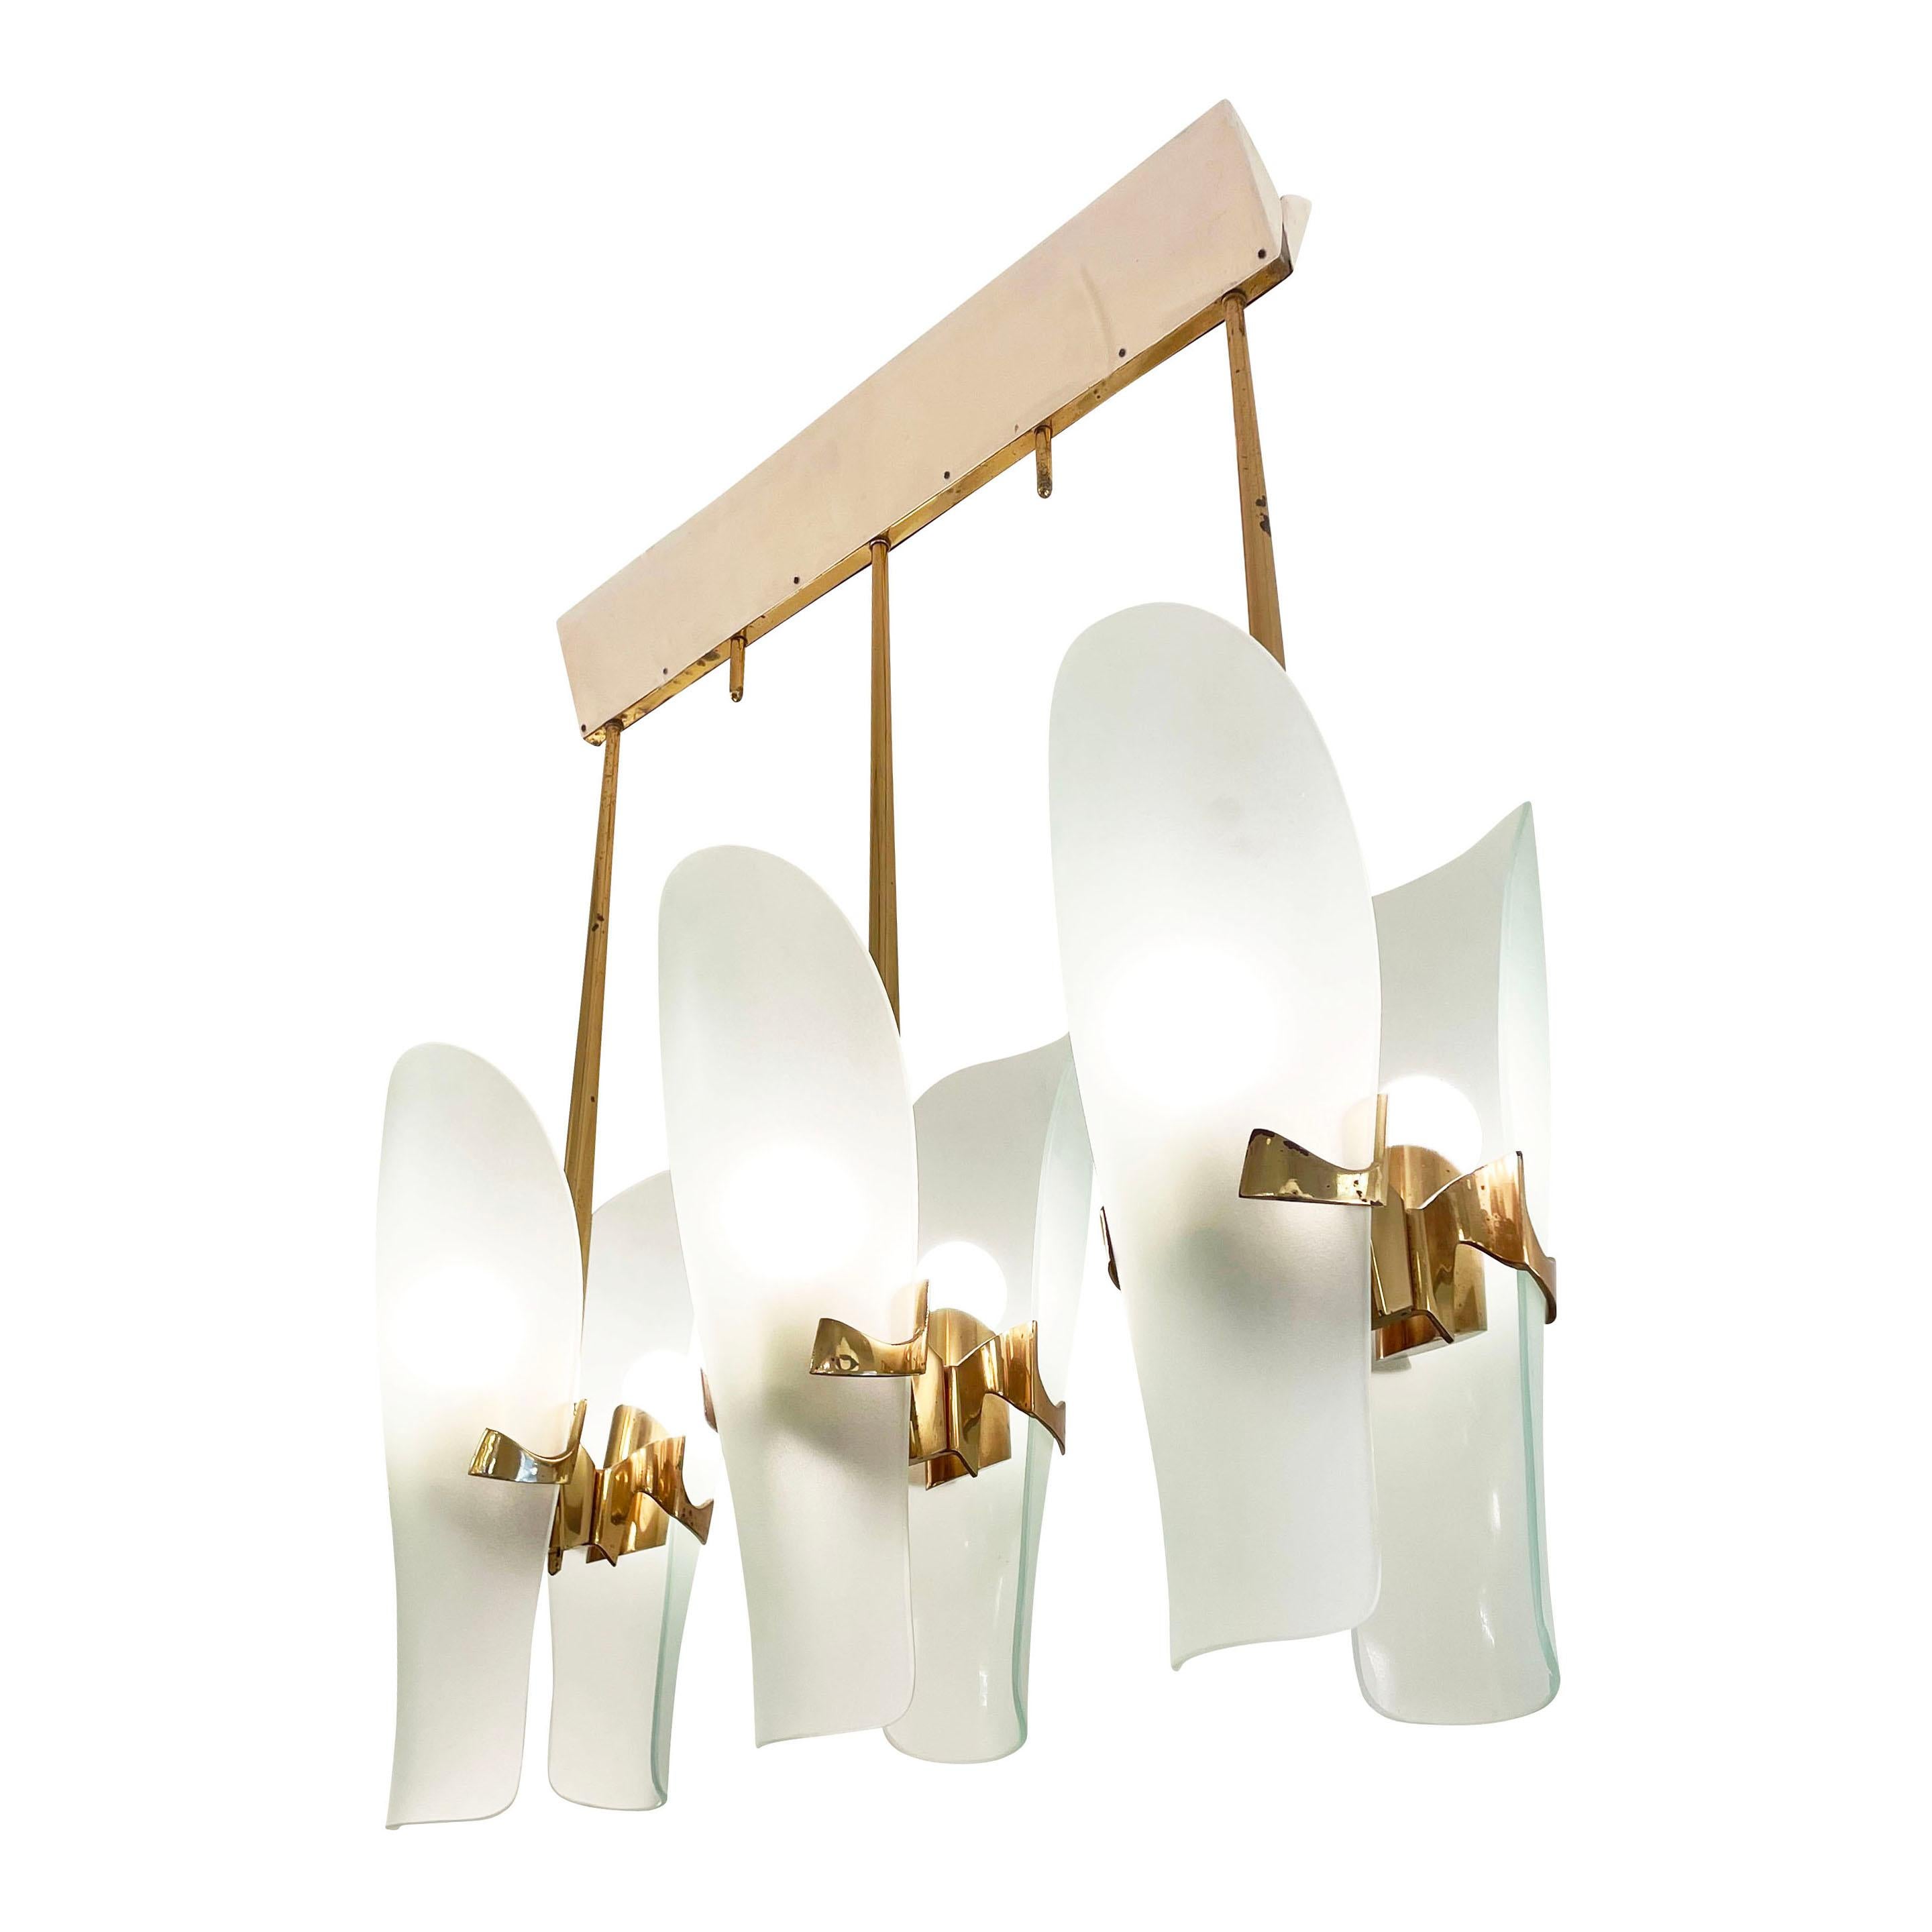 Elongated Fontana Arte chandelier designed by Max Ingrand in the 1960s. Its considered a commissioned work composed of six sconces model 1636 on a custom built frame. Each frosted glass shade mounts on a cast brass bracket and covers an E26